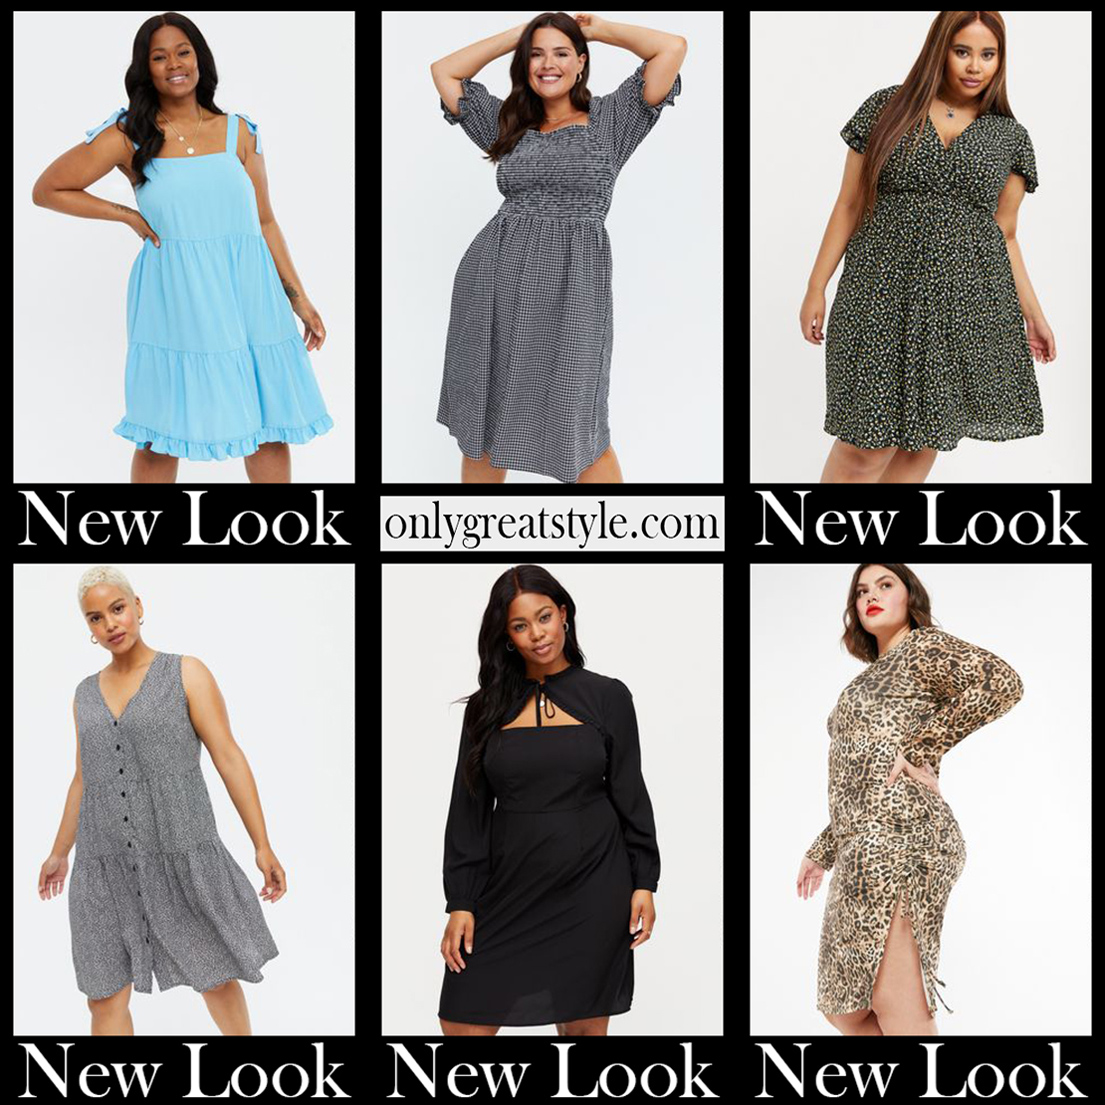 New Look curvy dresses plus size womens clothing